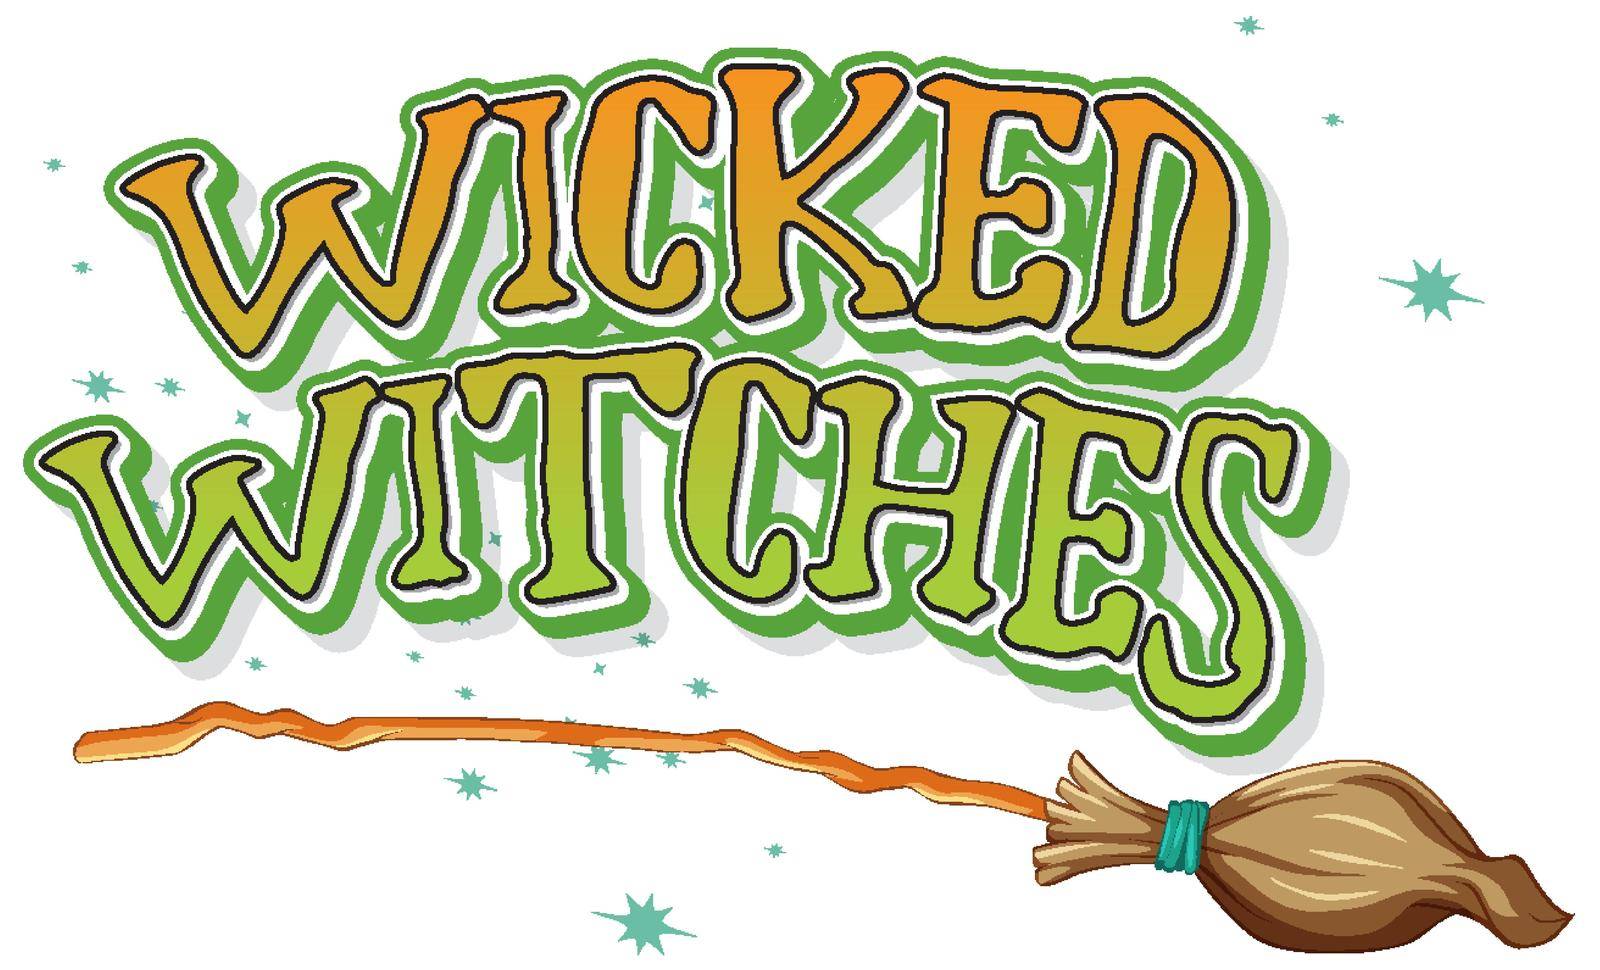 Wicked witches logo on white background by iimages